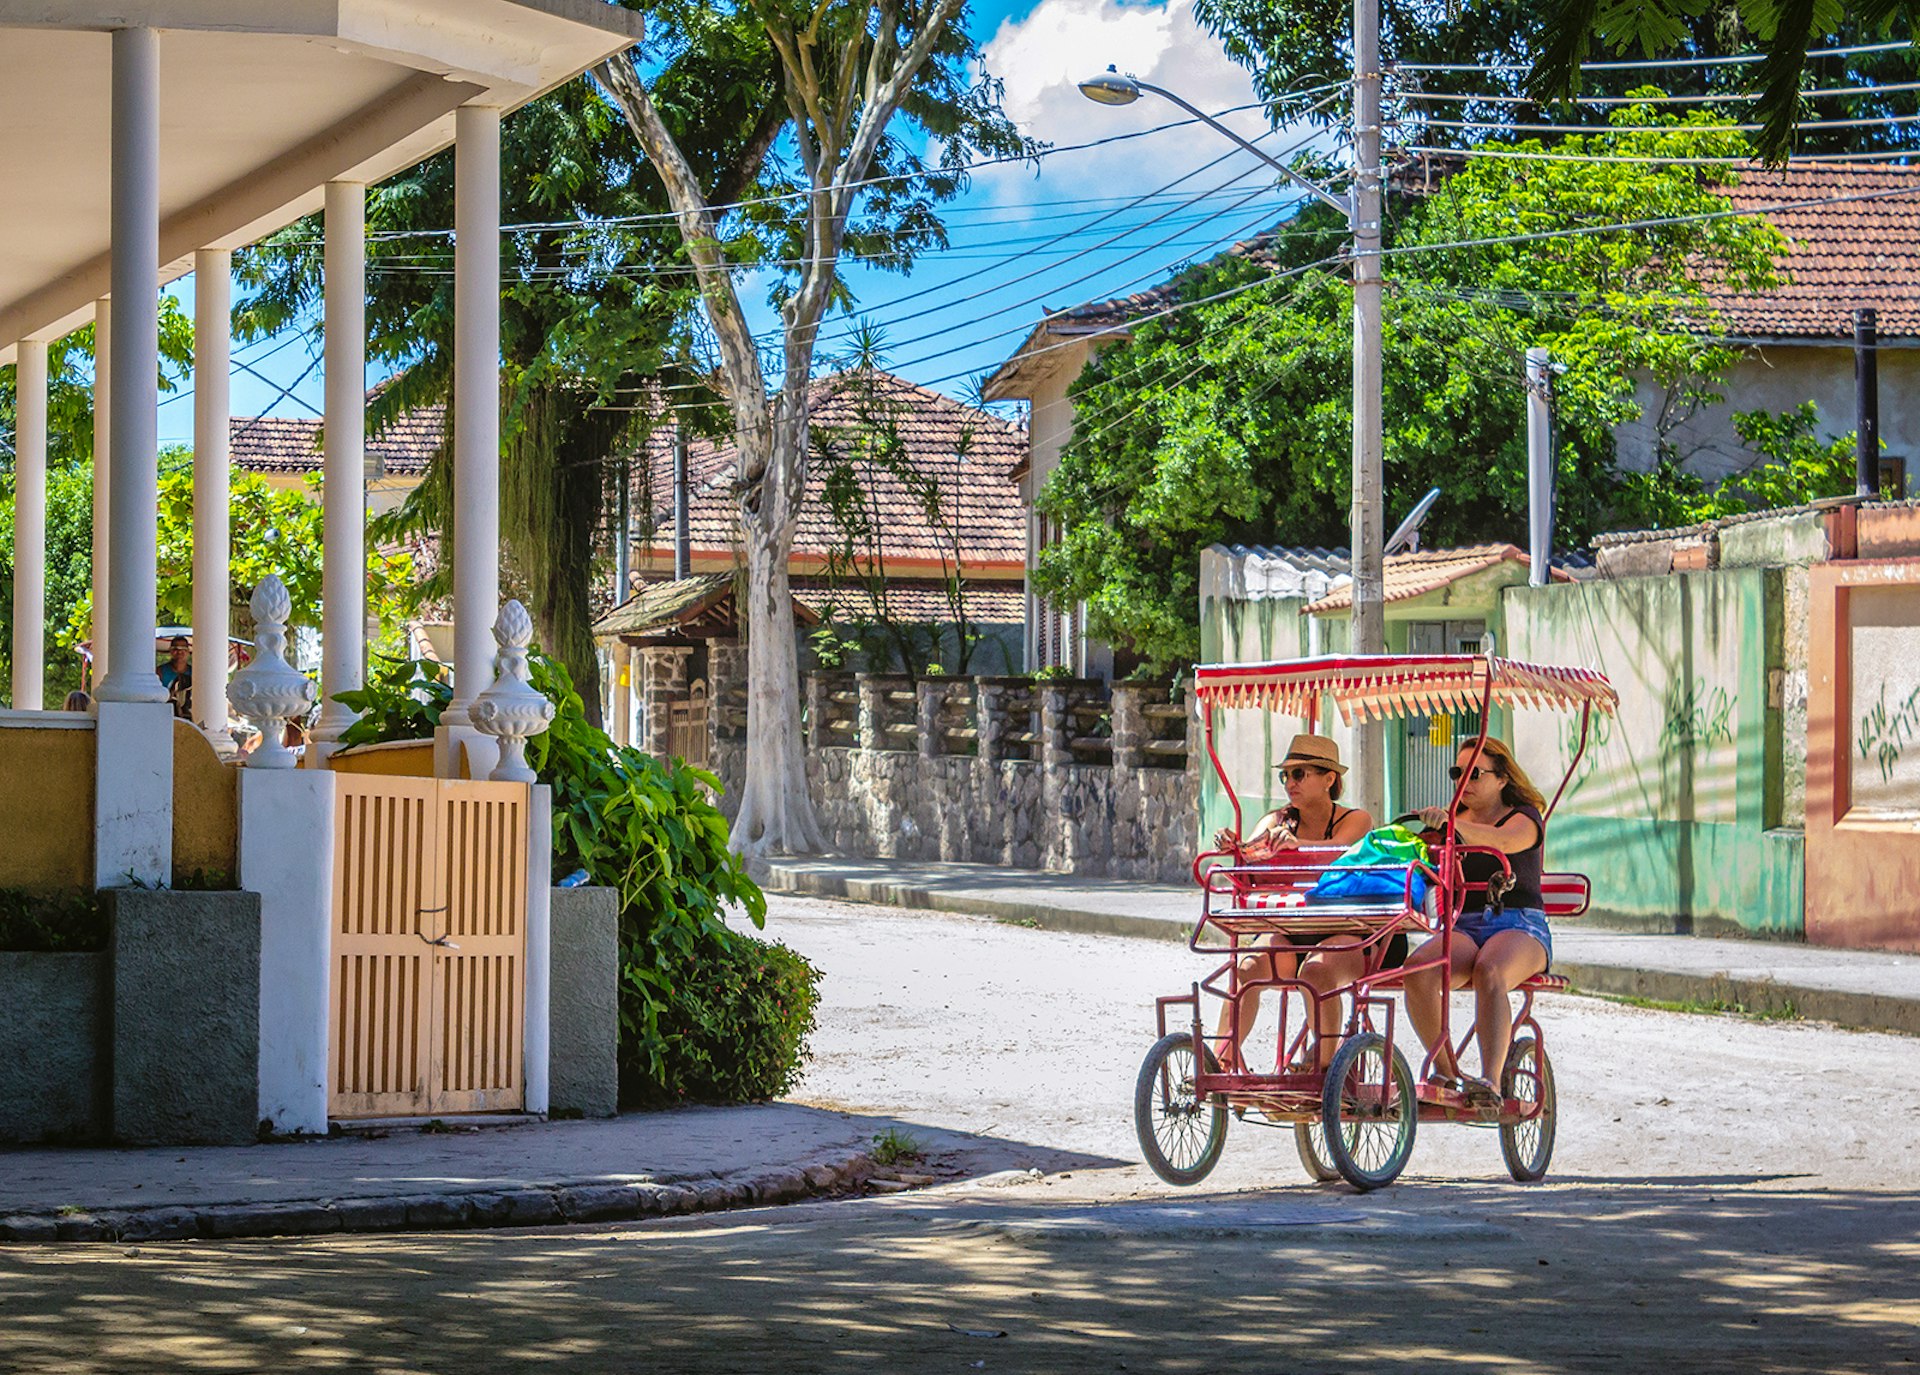 Two women pedal a foot-powered cart through a street lined with pastel-colored buildings on Ilha da Paquetá, Brazil